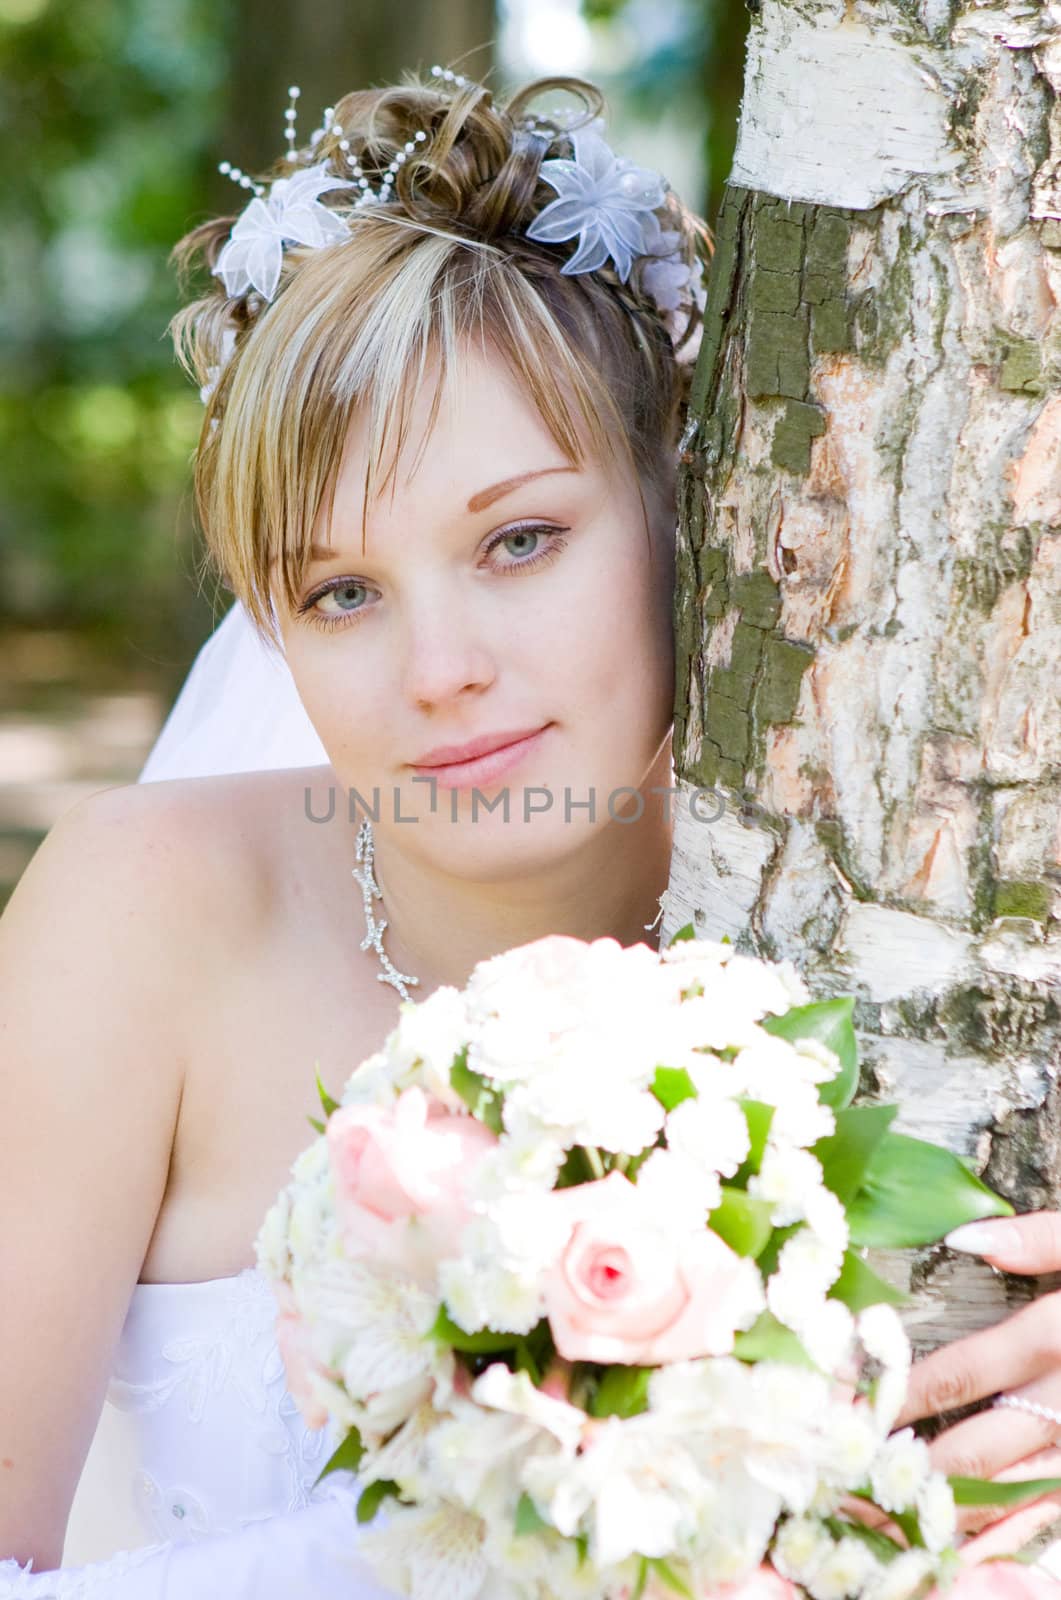 a bride with a flower bouquet by the tree by vsurkov